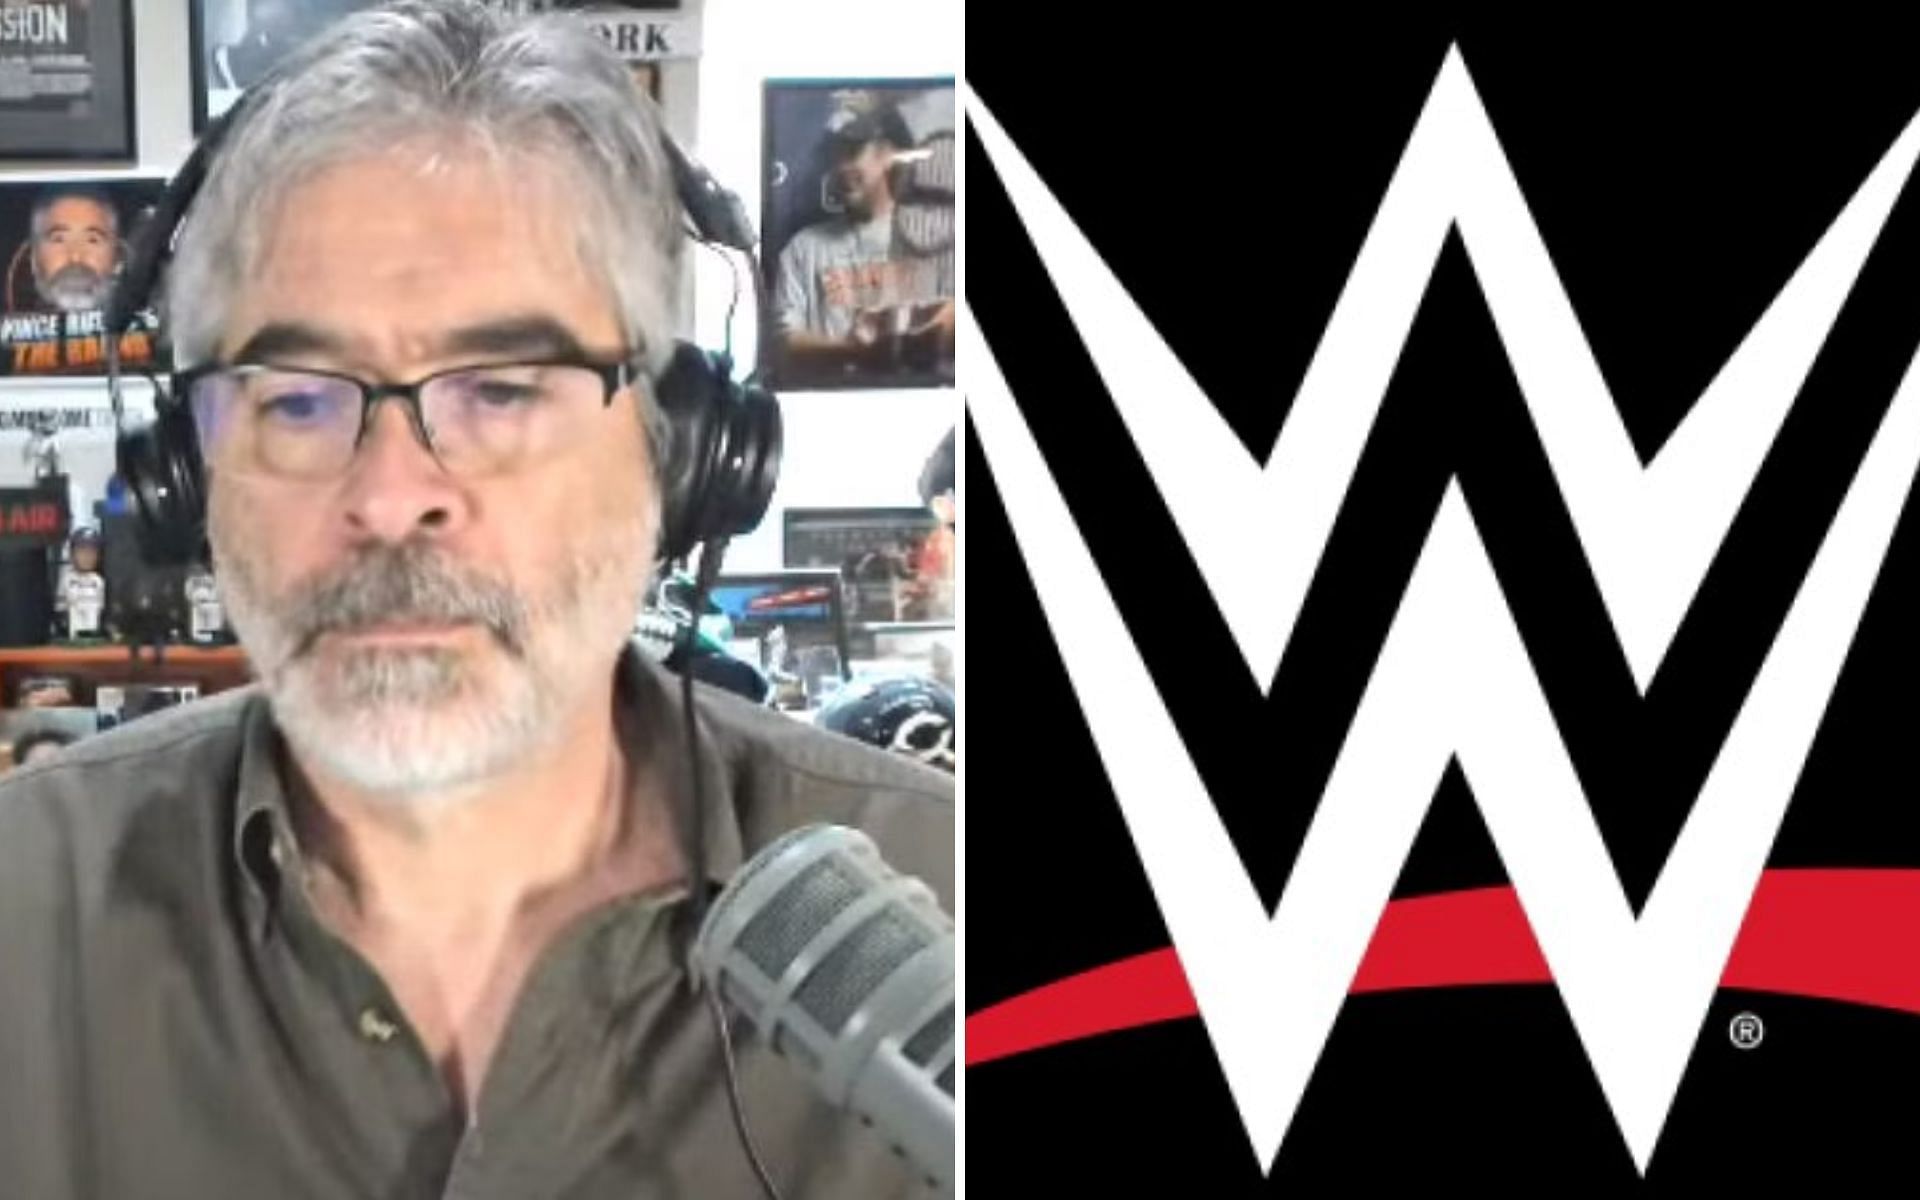 Who did the ex-WWE writer pick?